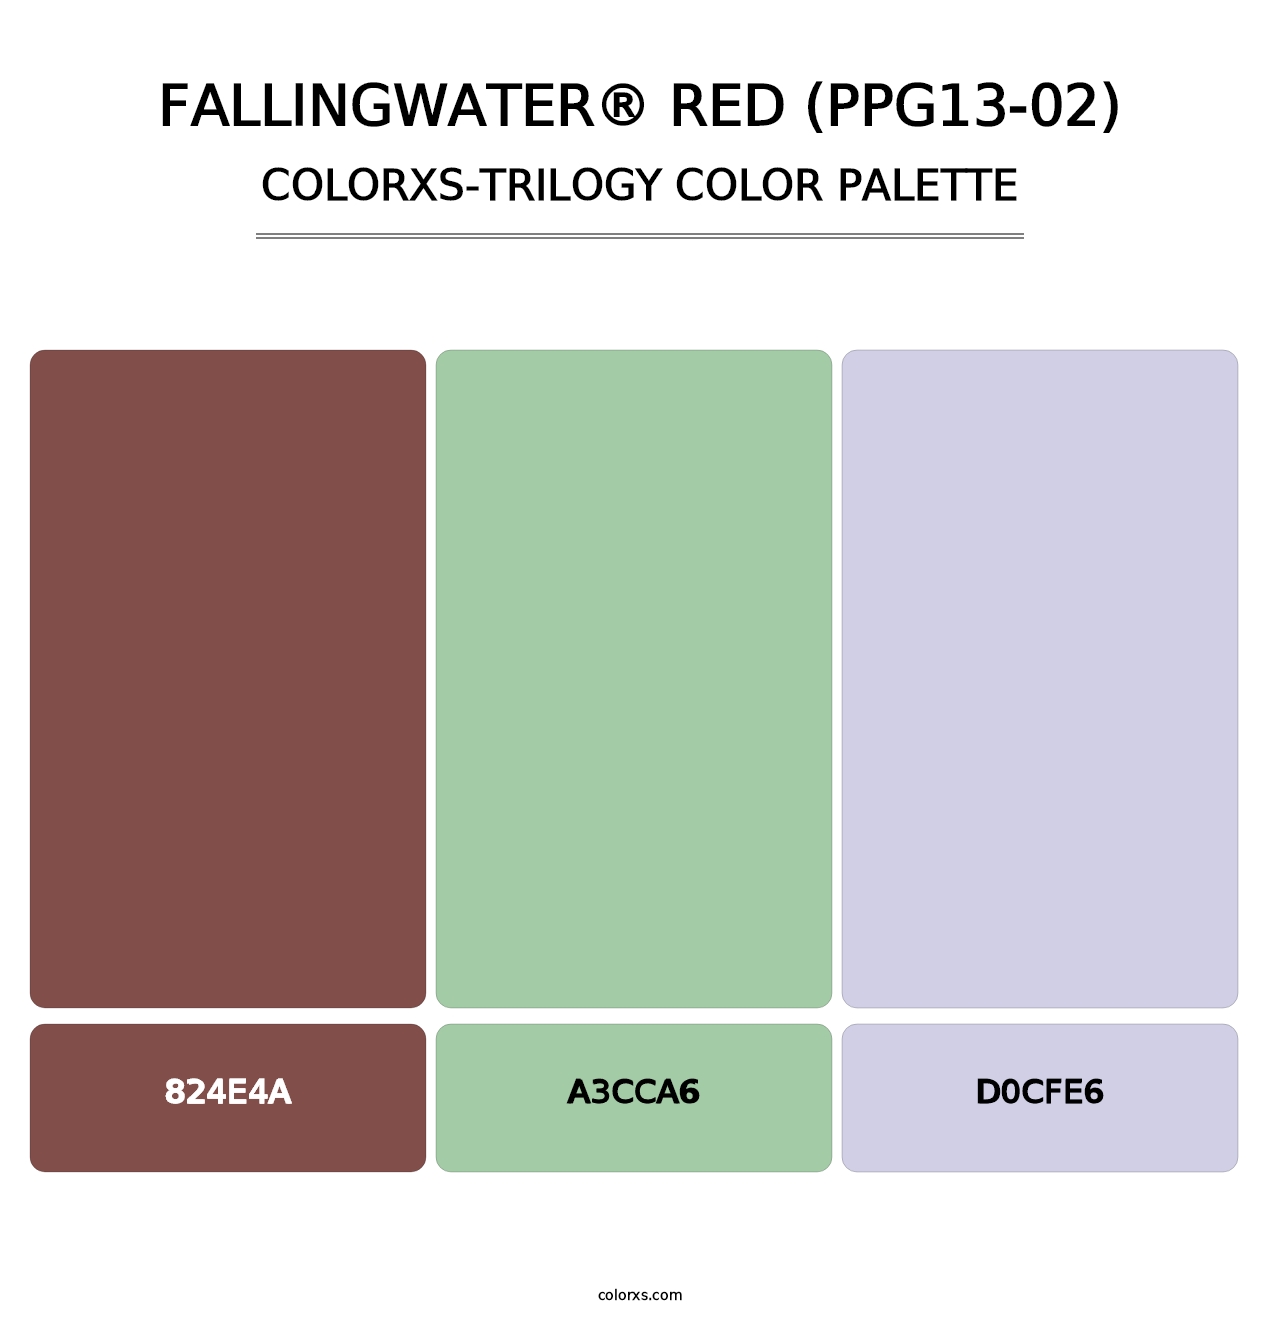 Fallingwater® Red (PPG13-02) - Colorxs Trilogy Palette